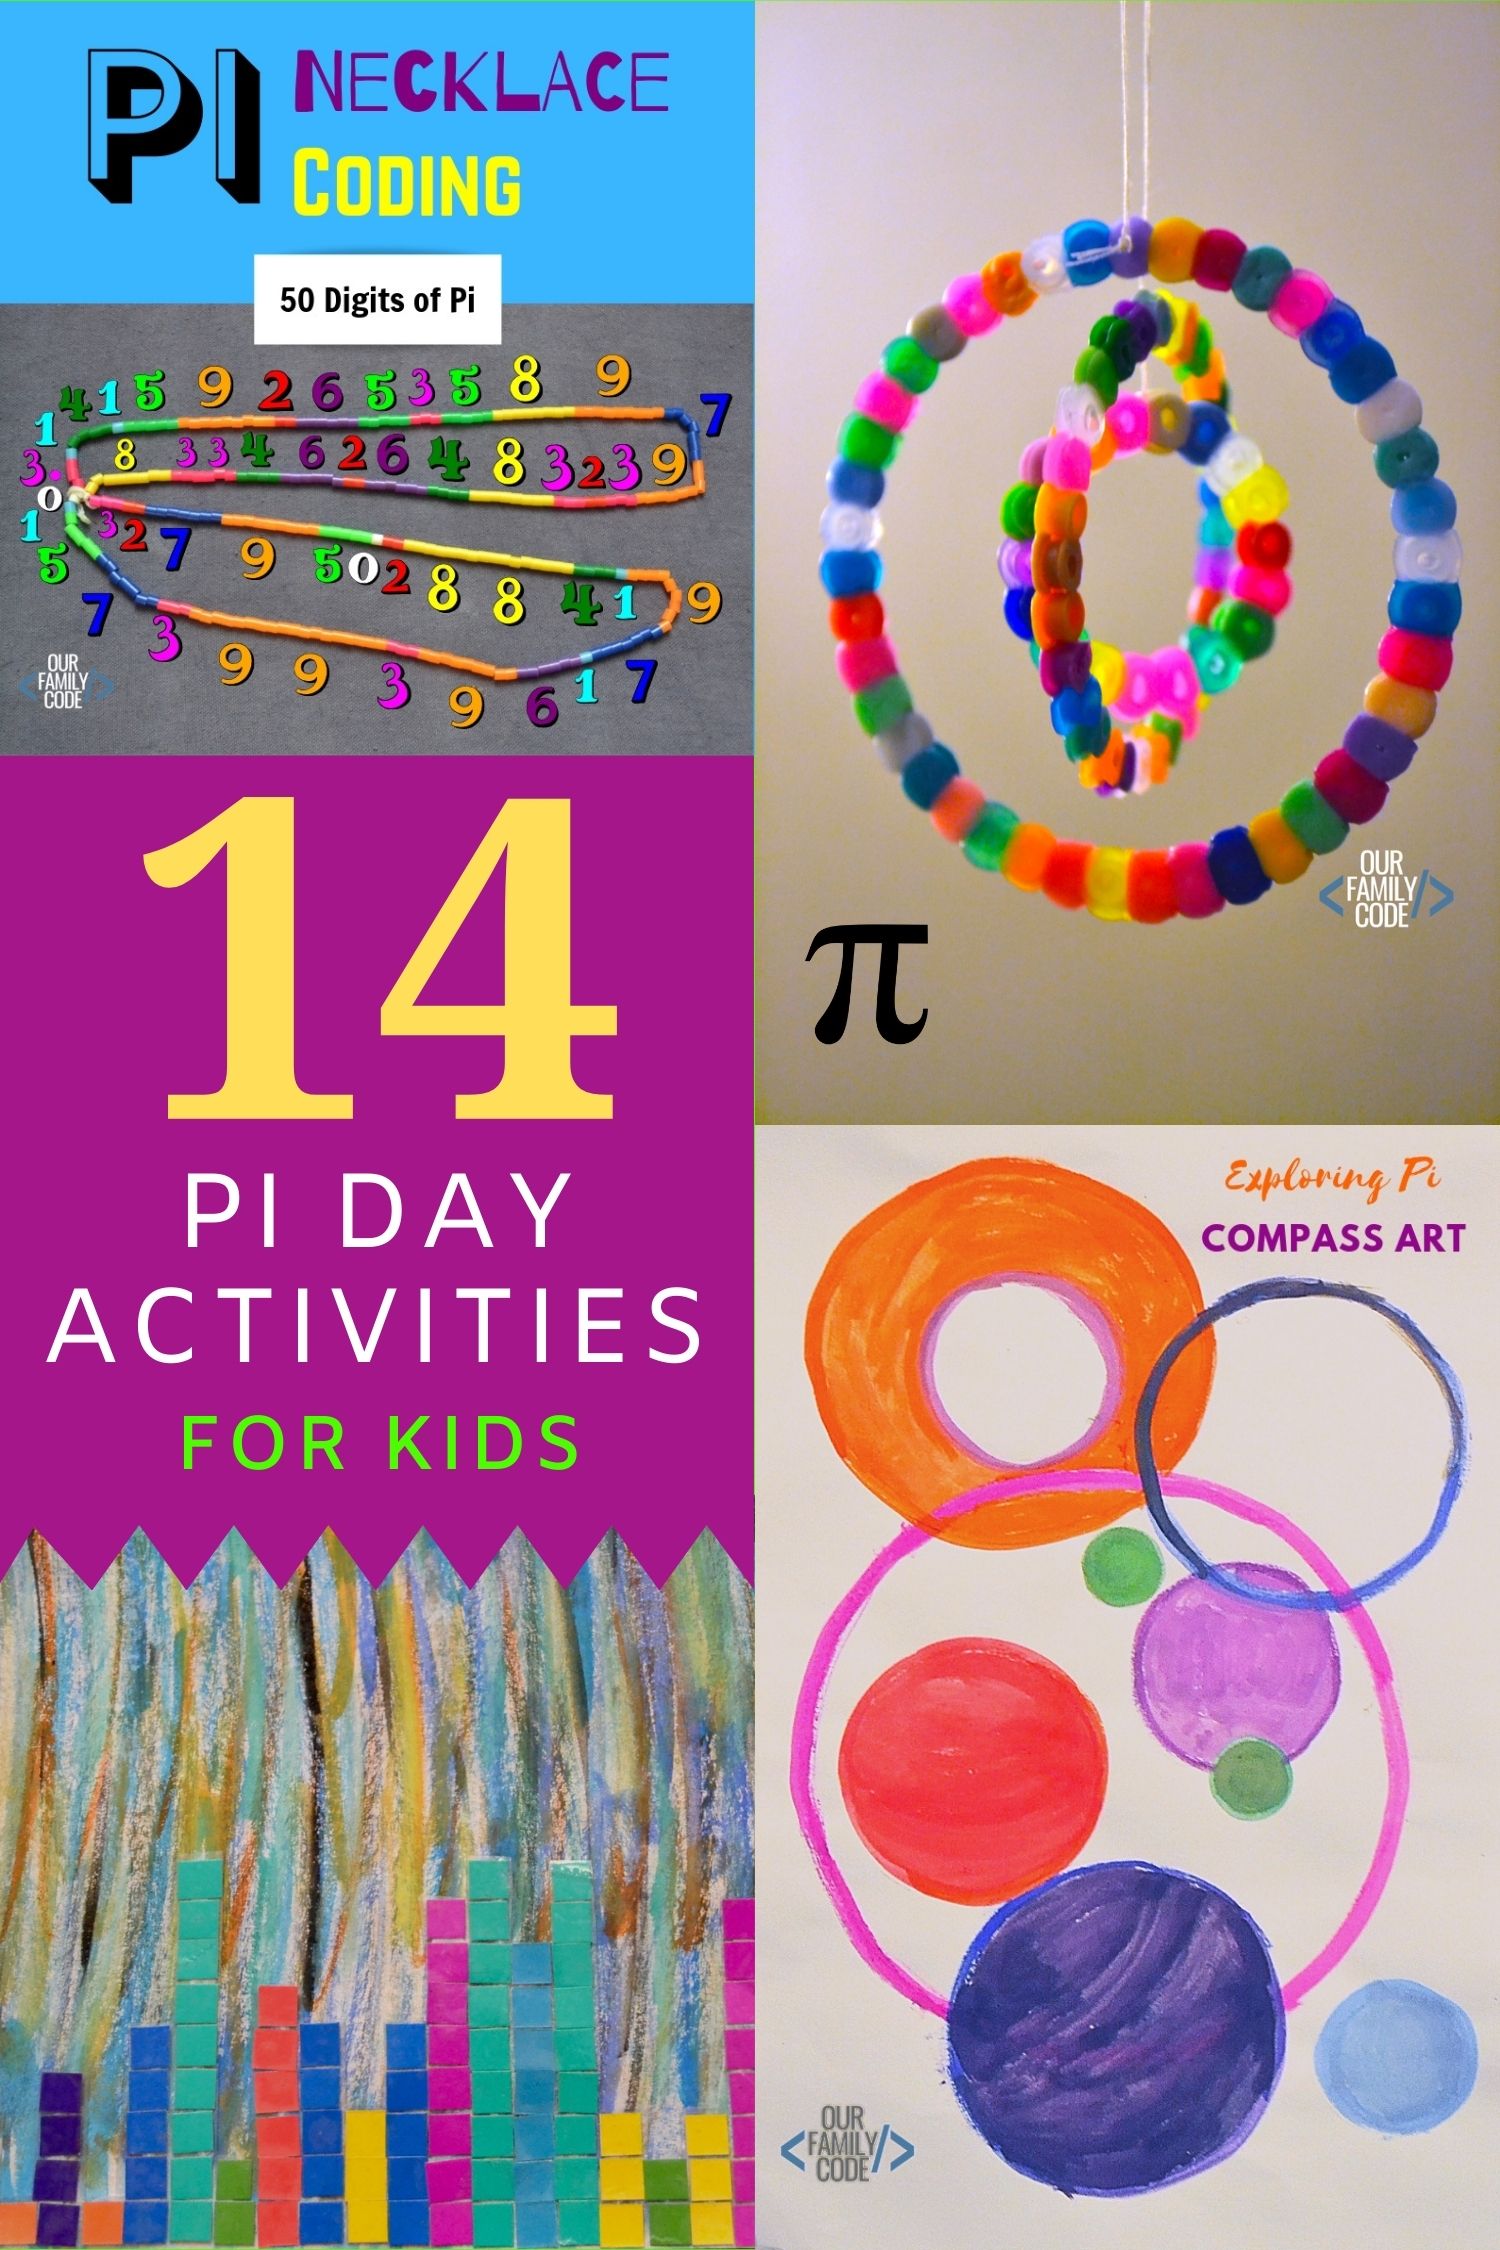 A picture of pi day activities for kids in a collage.